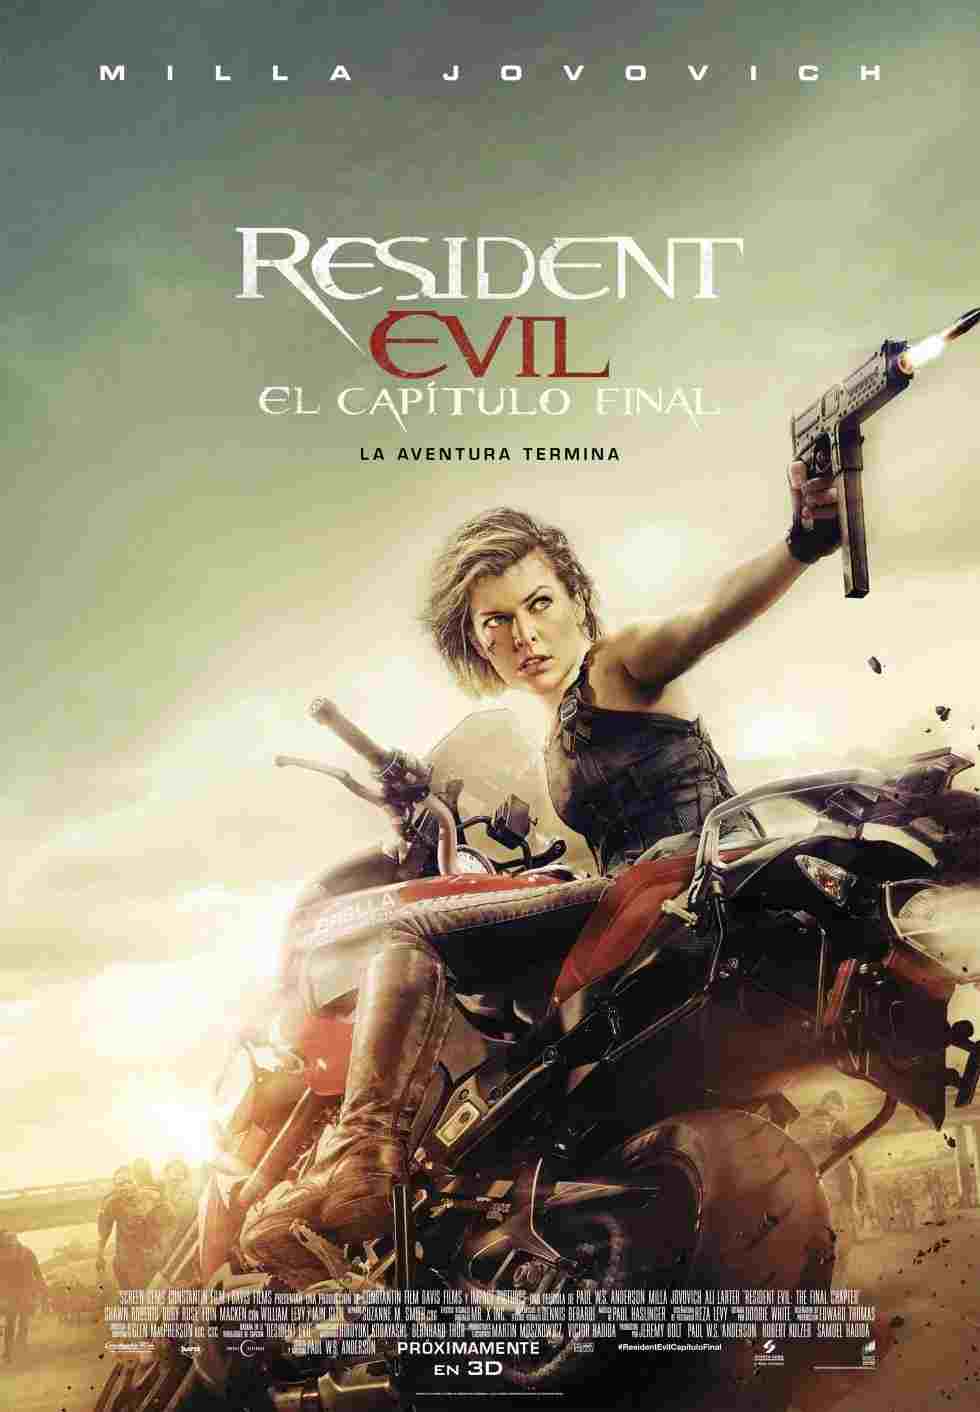 RESIDENT EVIL: CAPITULO FINAL